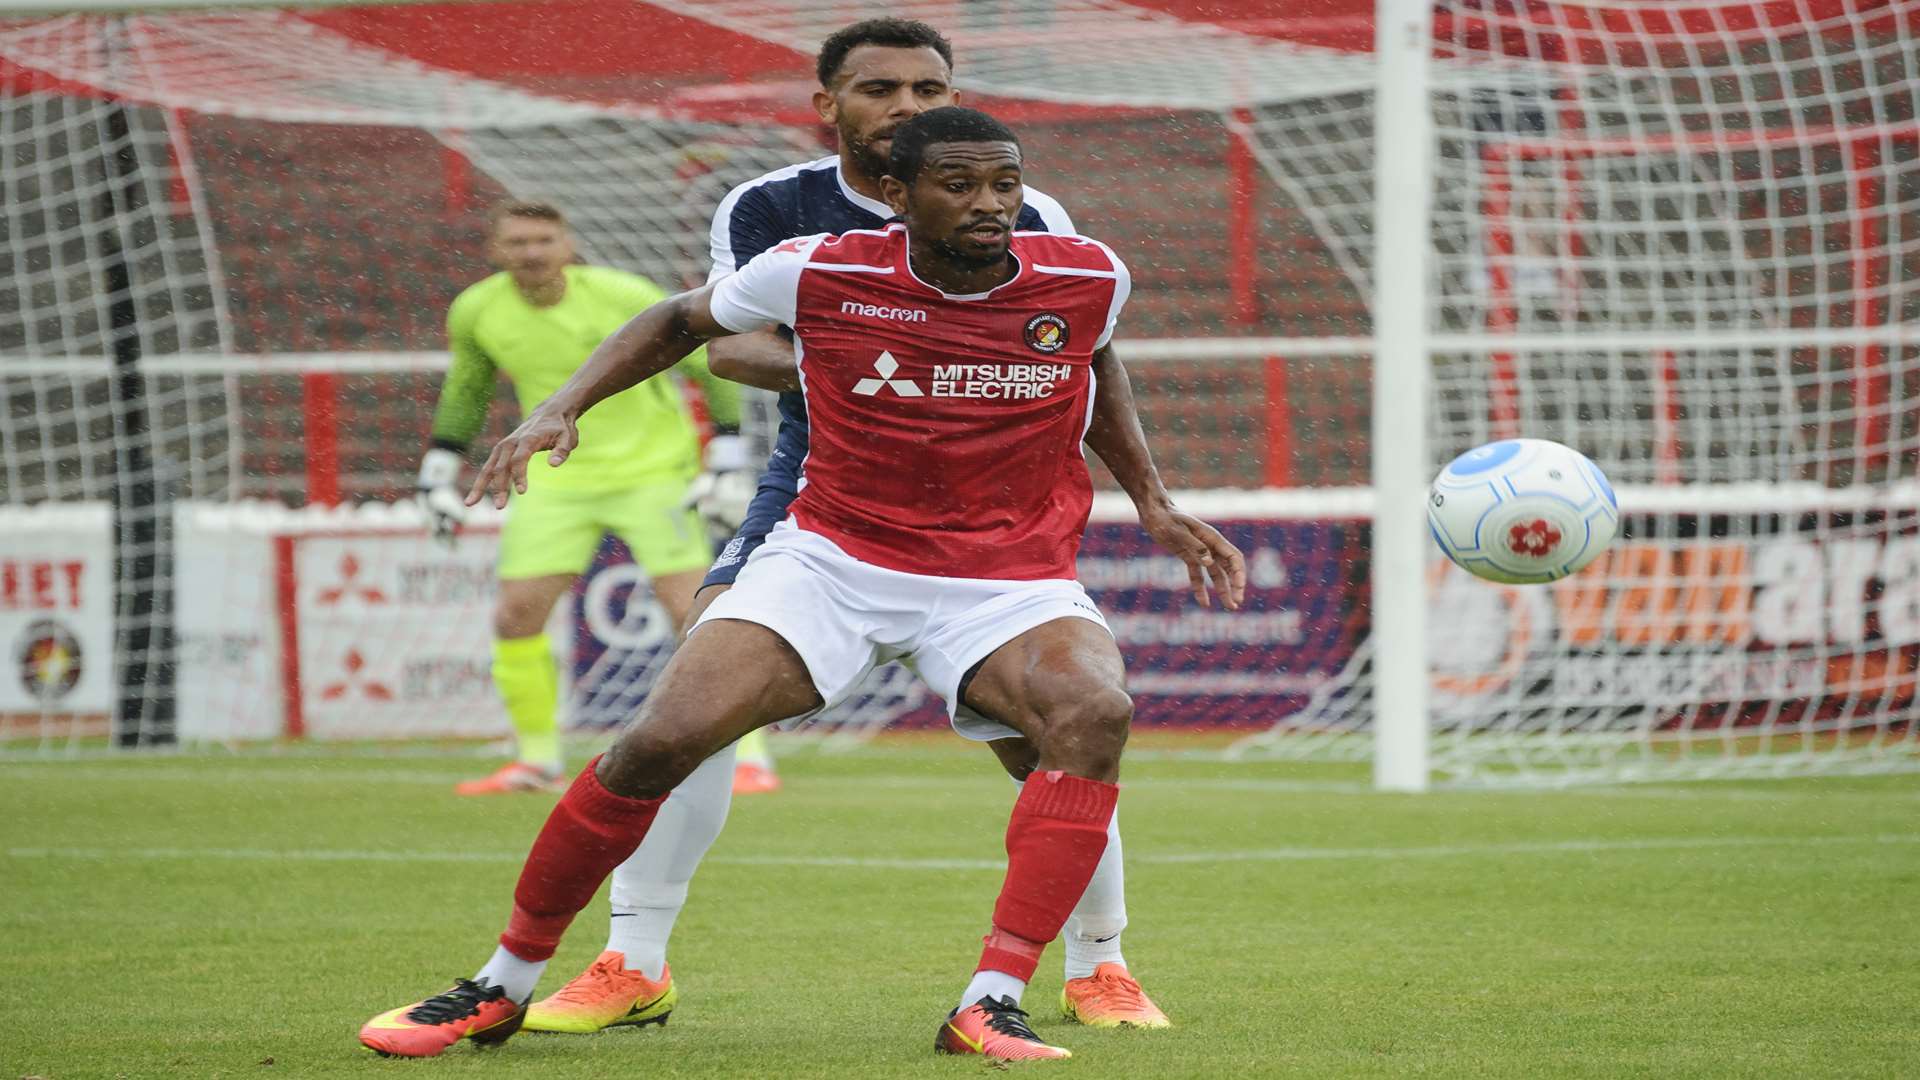 Danny Mills opened his account for Ebbsfleet Picture: Andy Payton